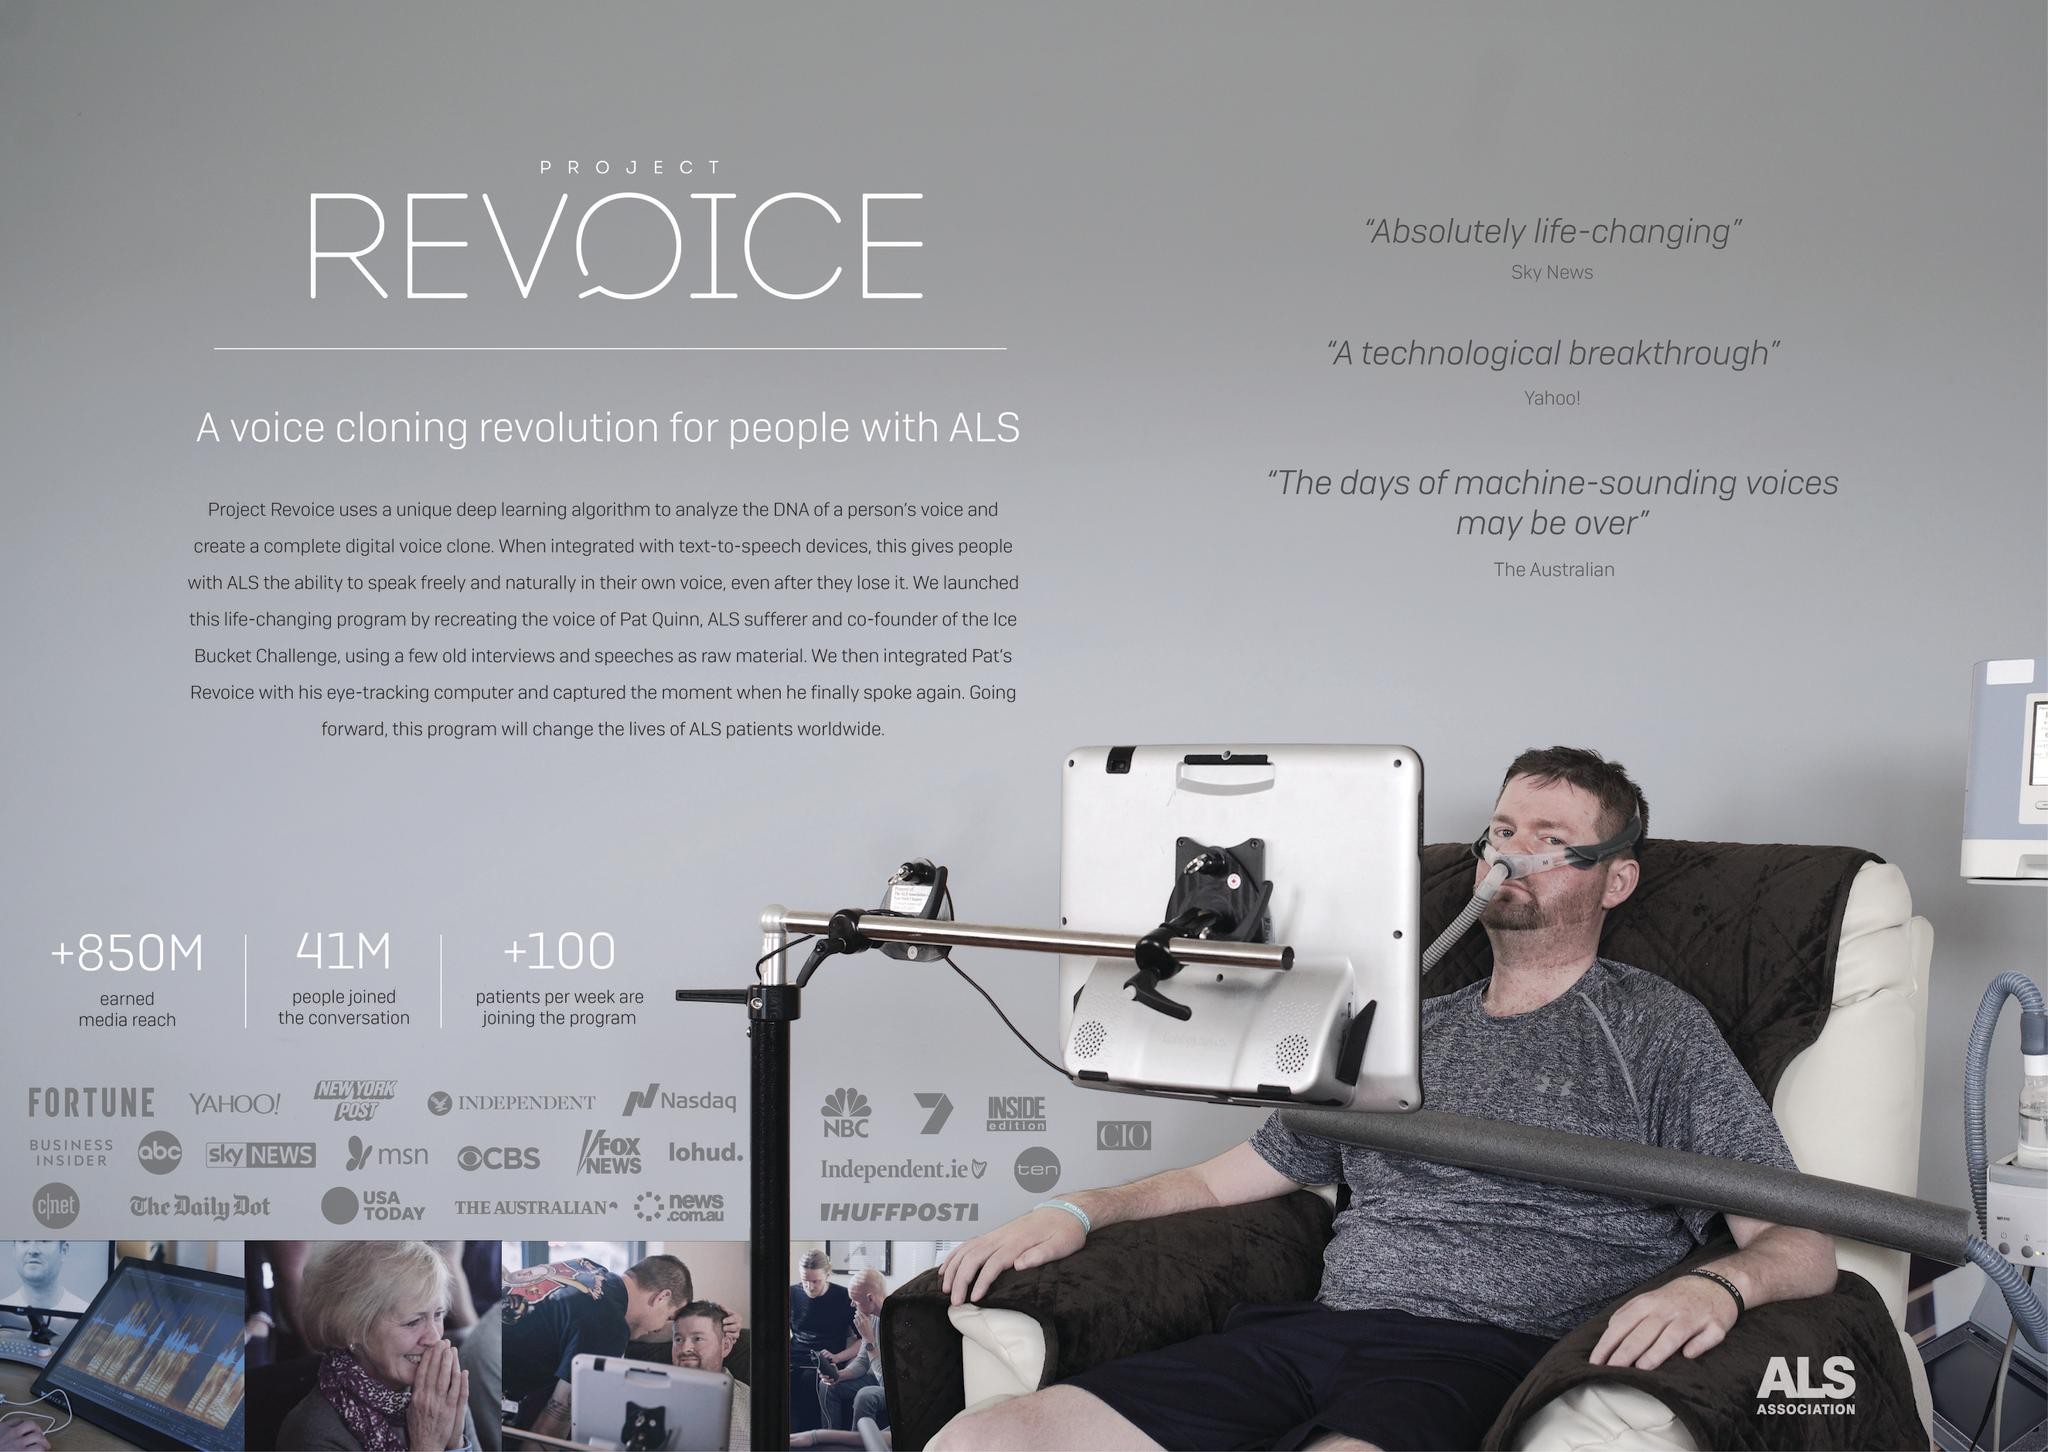 PROJECT REVOICE